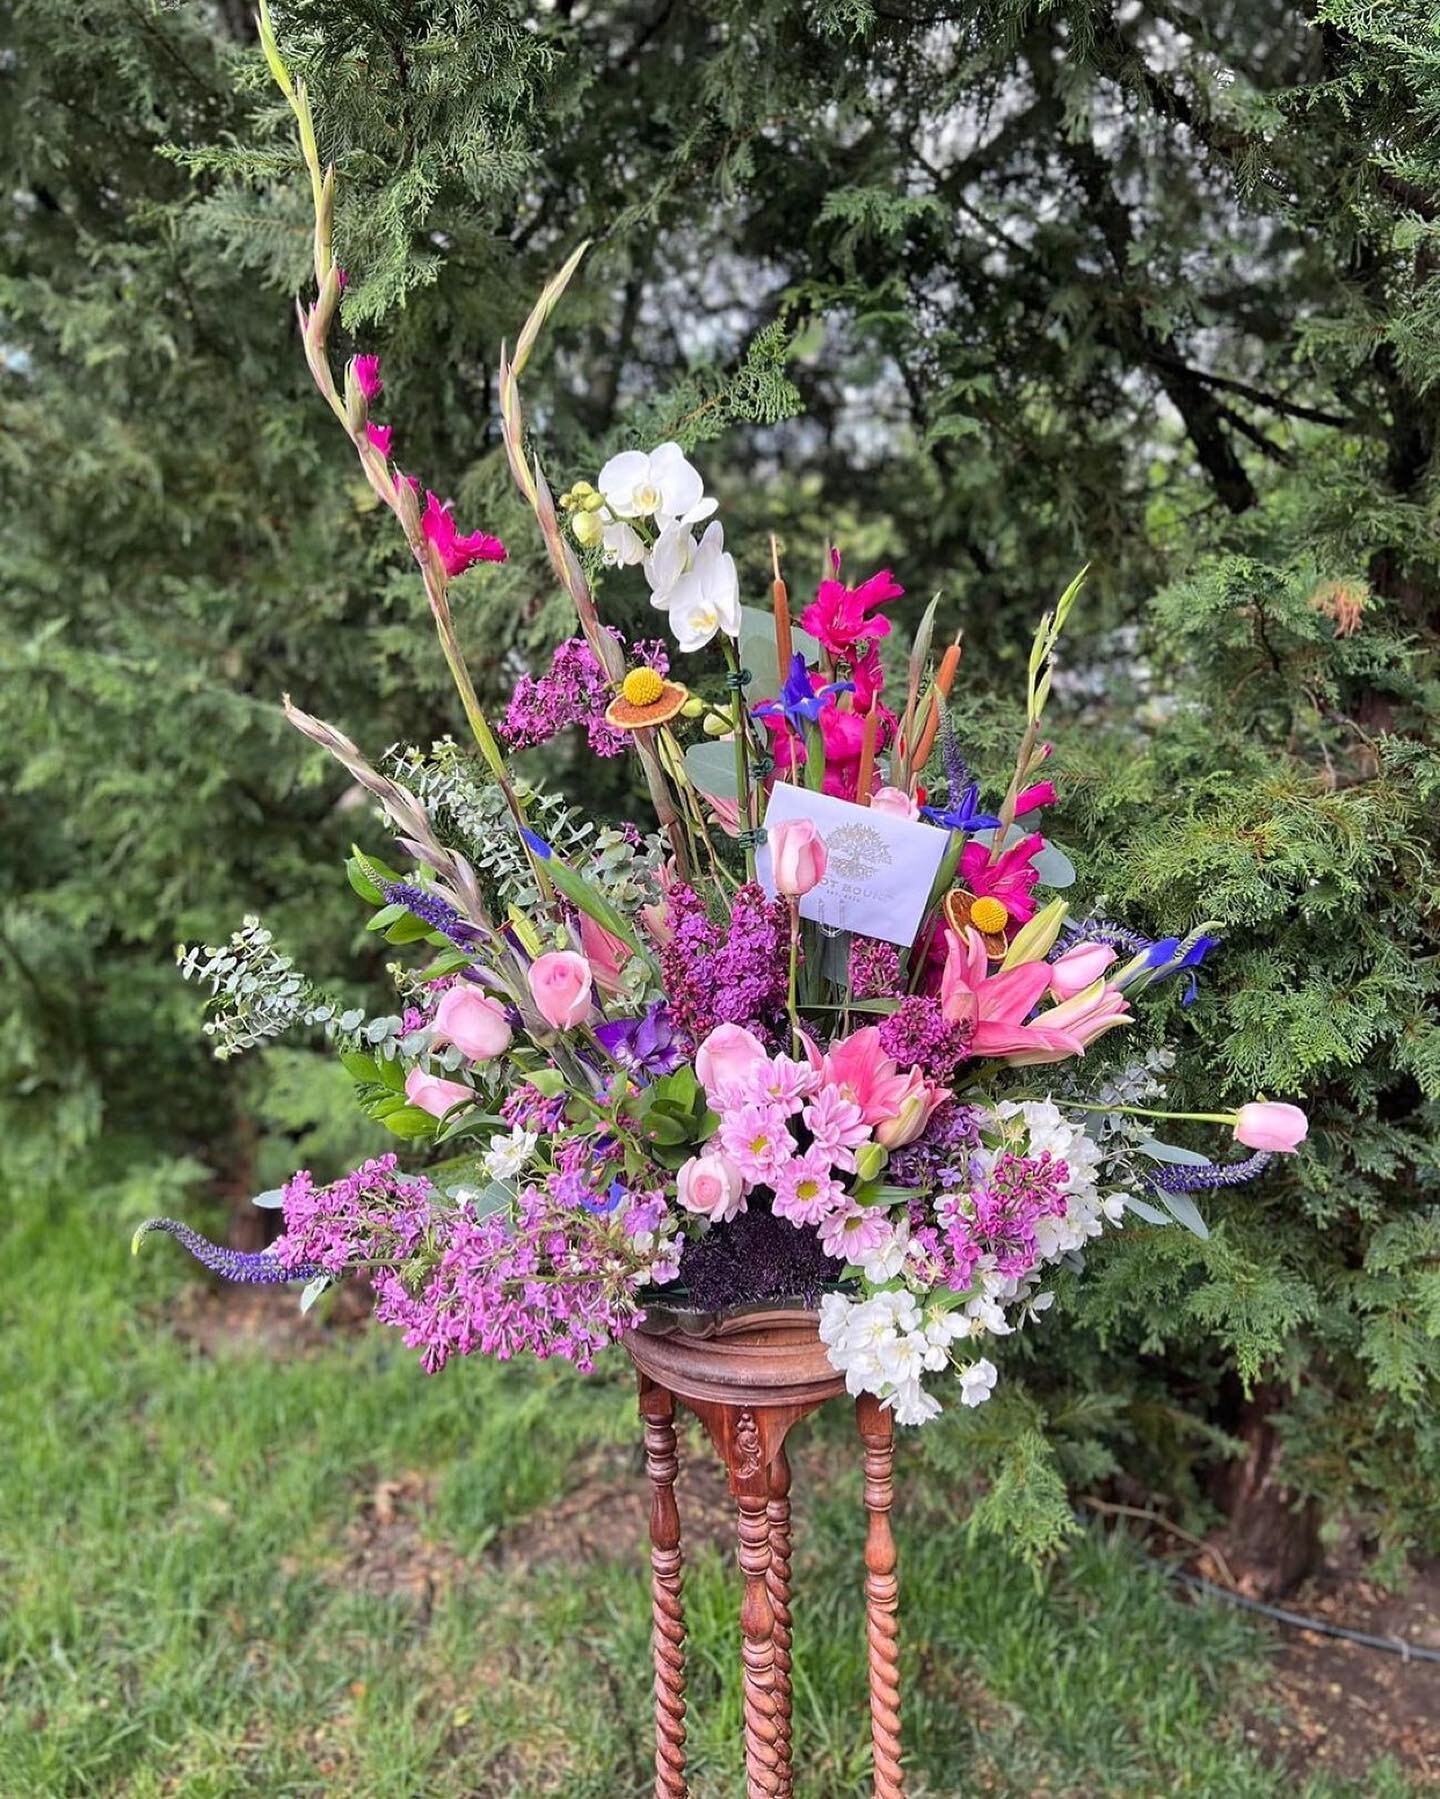 Don&rsquo;t forget! The fabulous @rootboundboise will be at Enchanting Objects from 12-3 on Saturday, May 13. Pick your choice of vintage containers and the incredibly talented Luke, will put together a gorgeous arrangement for the wonderful mom in y